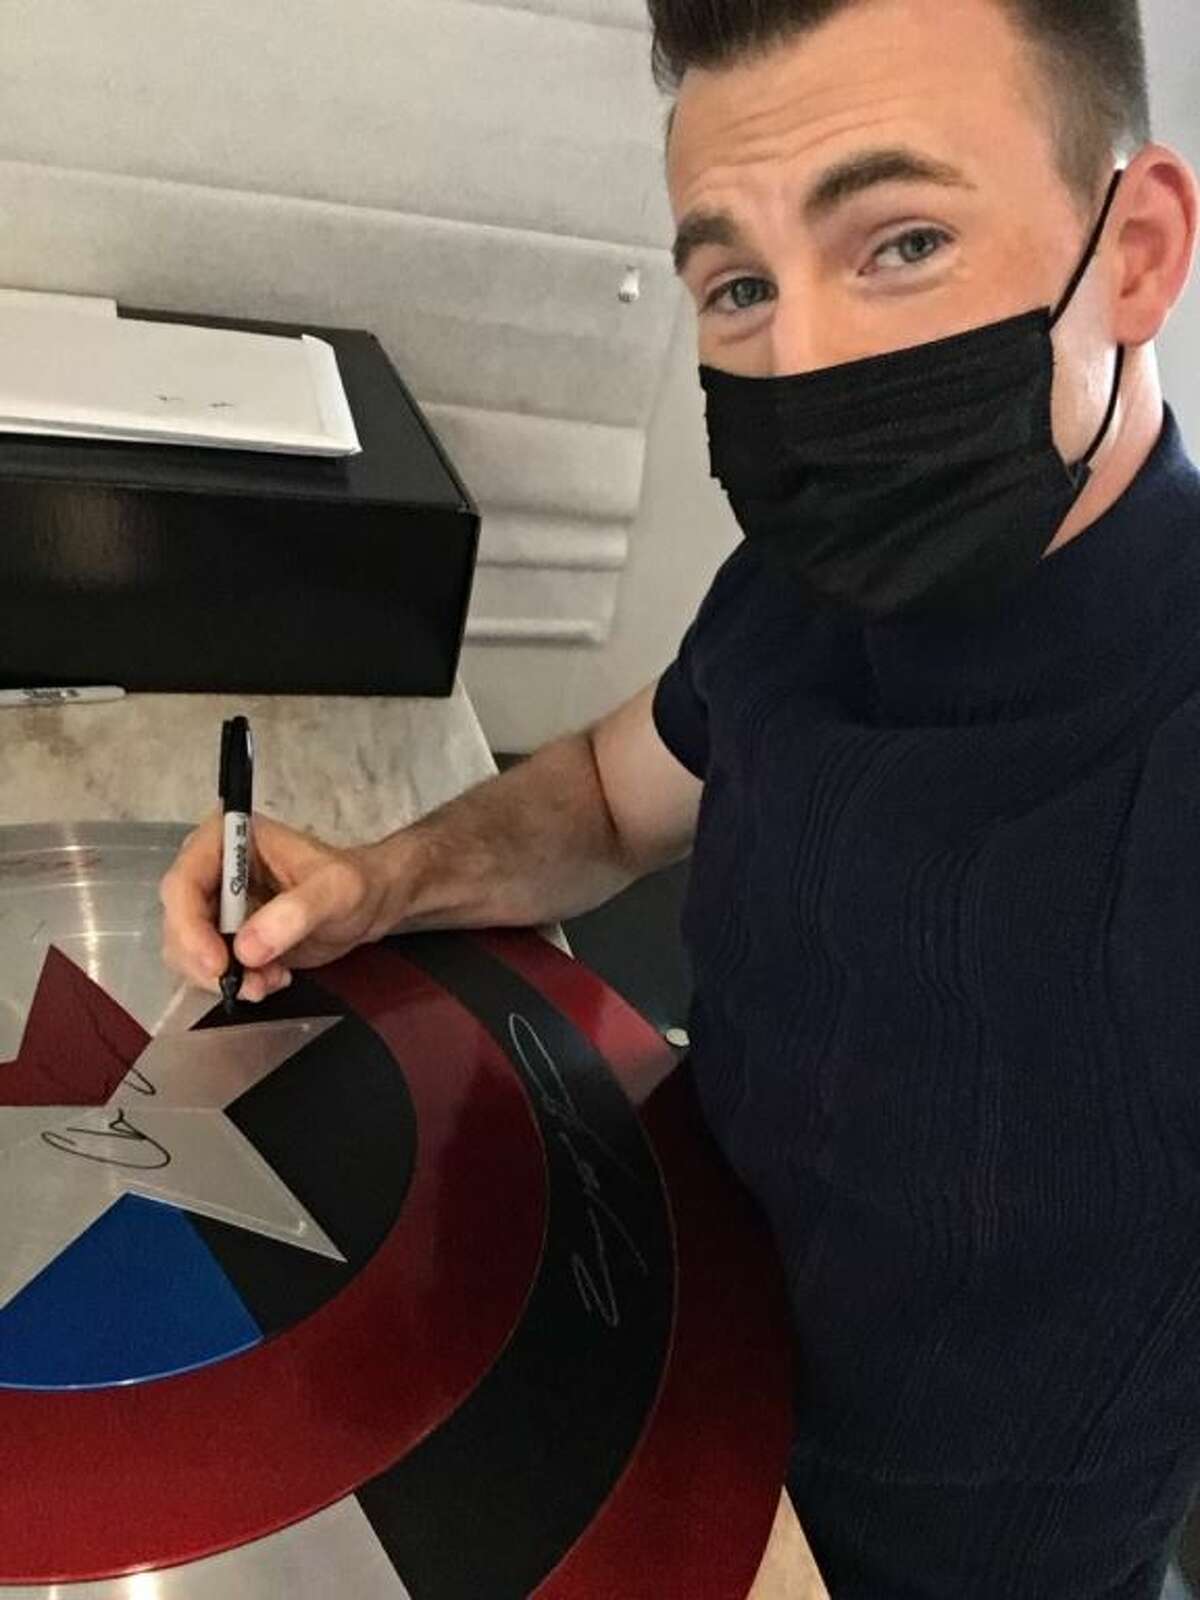 Actor Chris Evans, who plays the original Captain America in the Marvel Universe movies, was one of four actors to sign the shield.